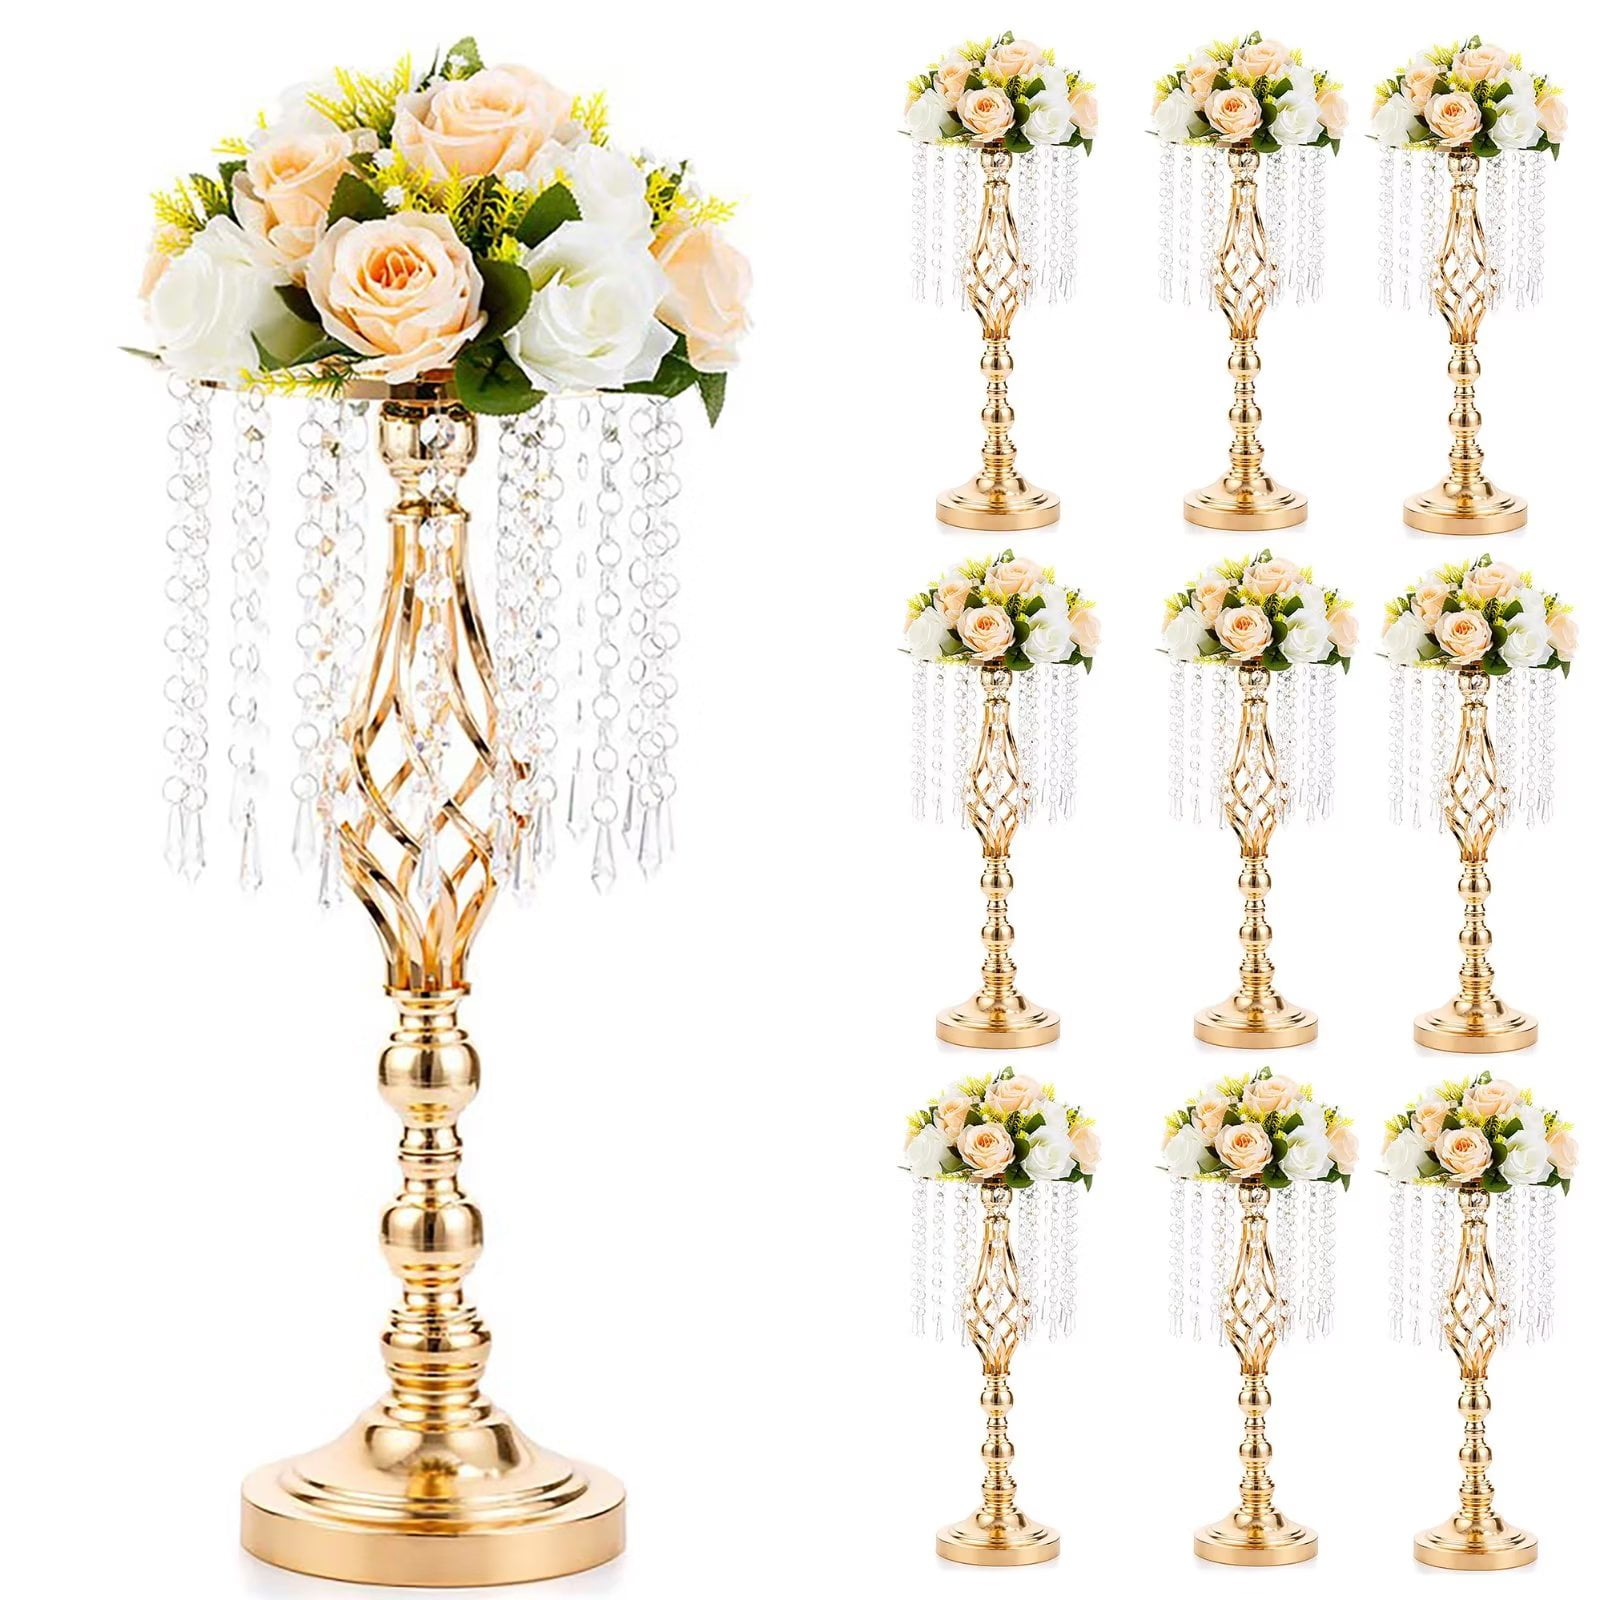 Whitestone Reserve - Gold Square Floral Stand 32 Tall - Inventory: 6